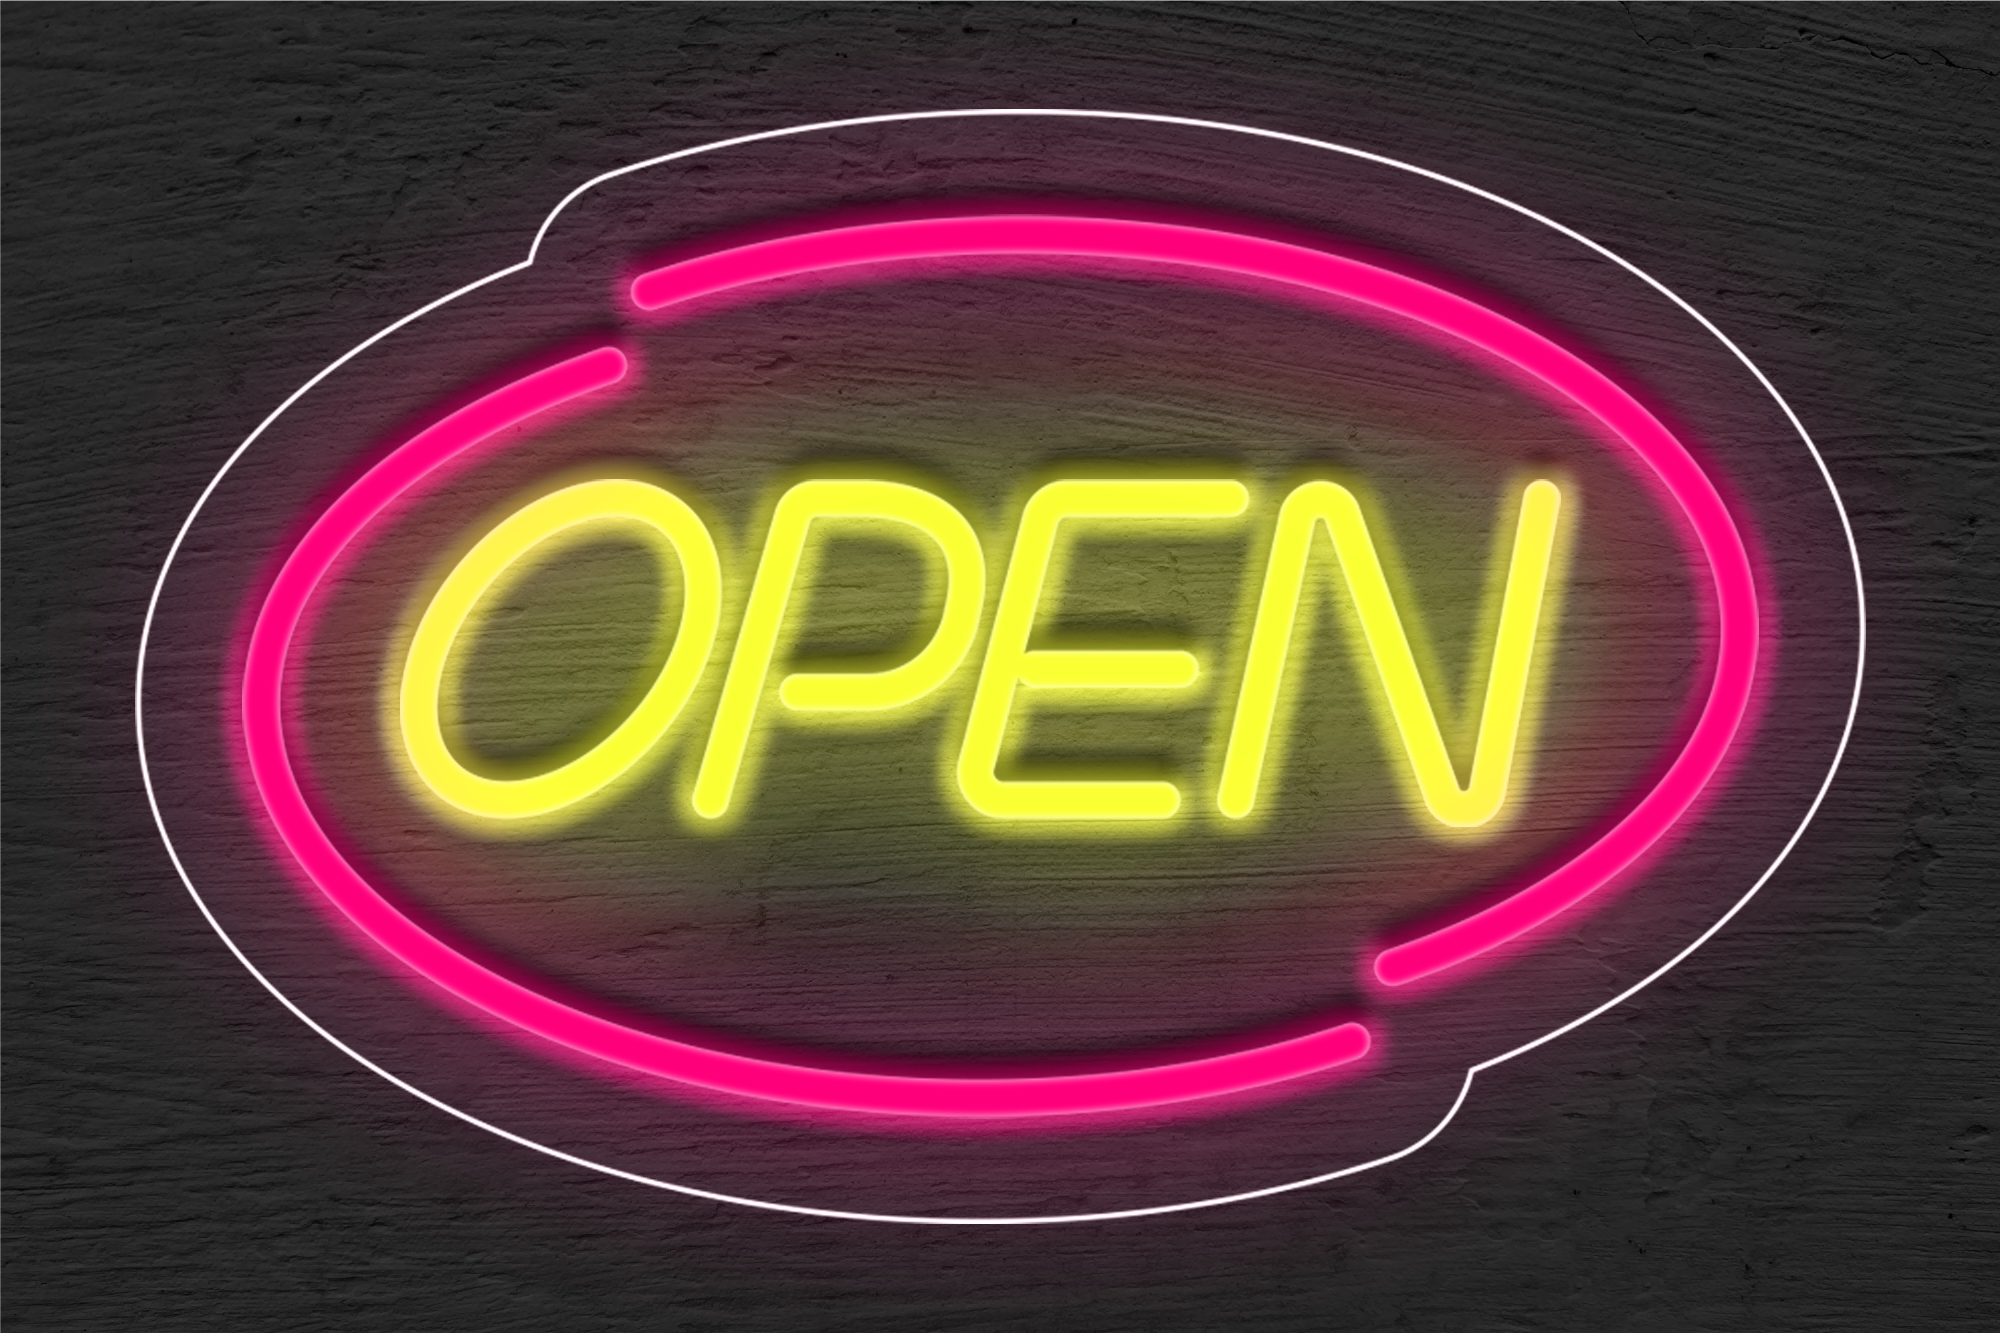 "Open" with Oval Border LED Neon Sign